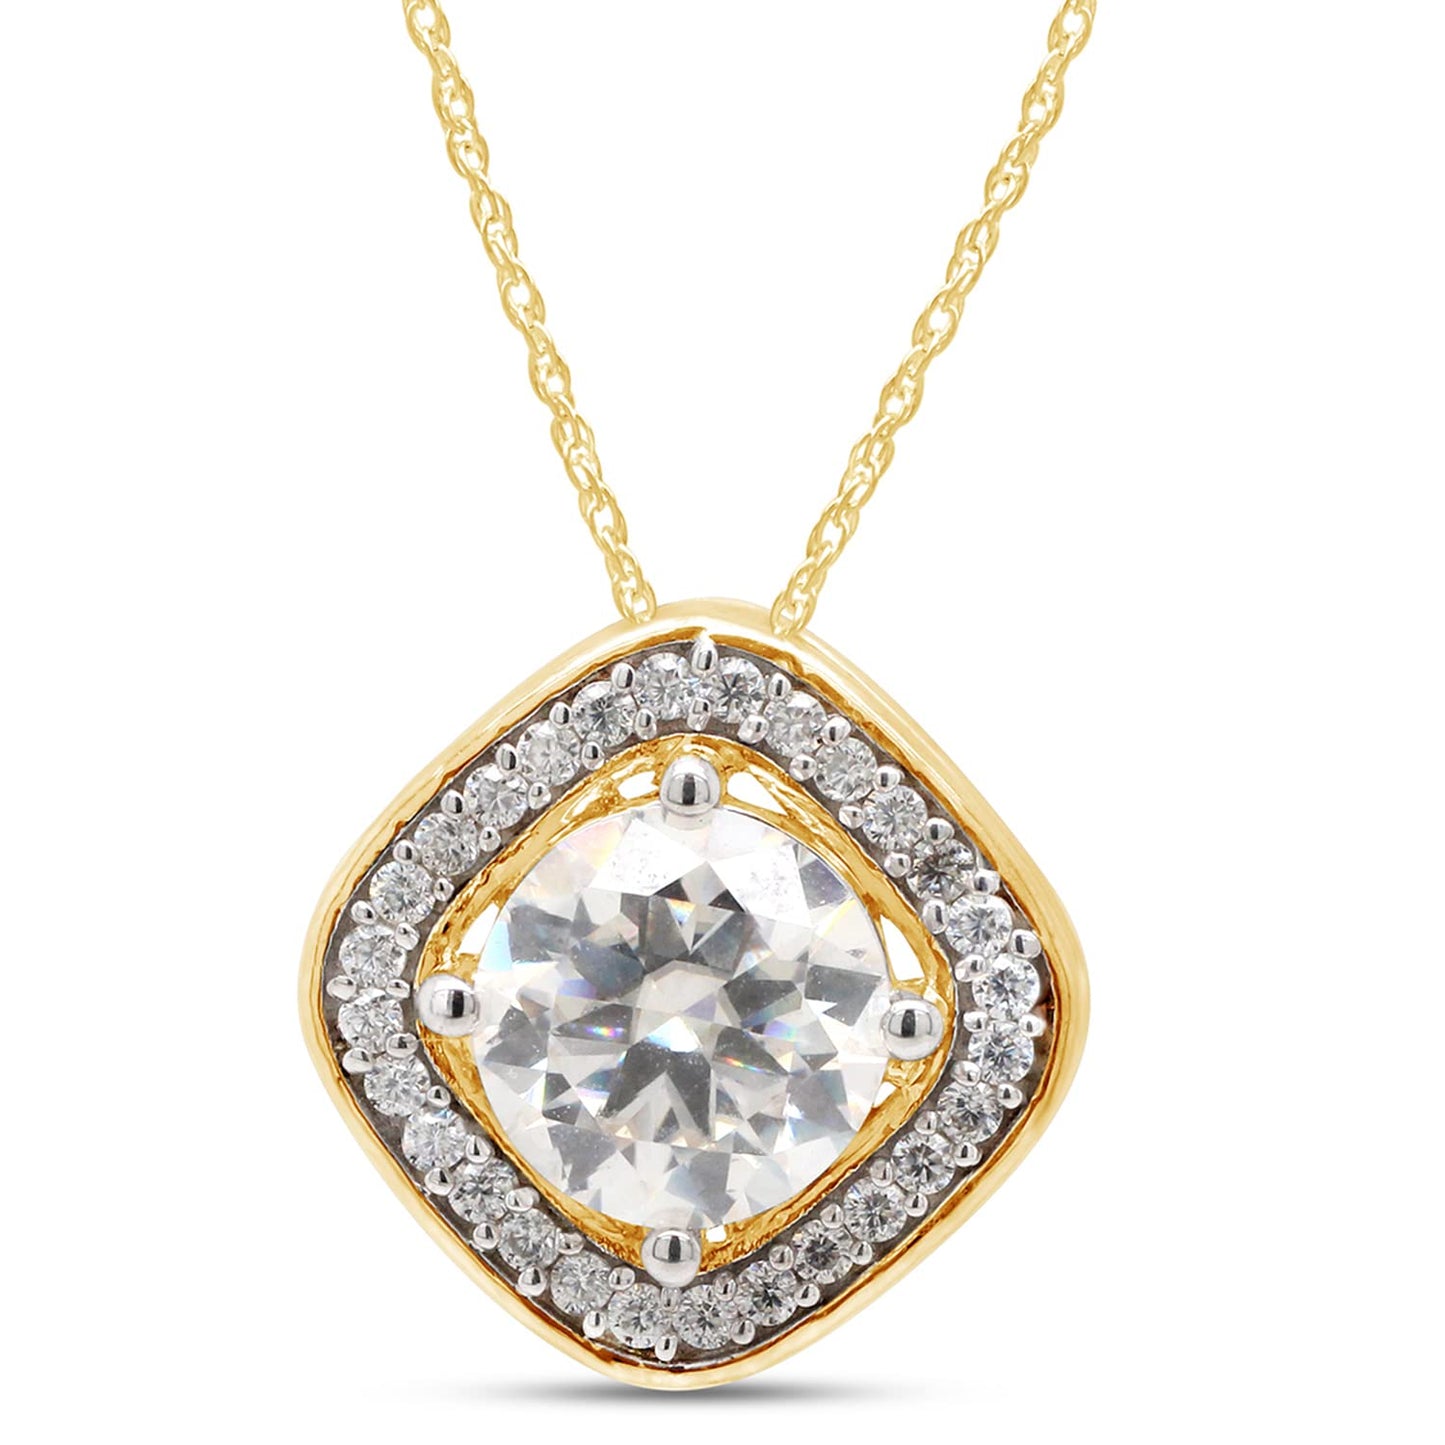 Load image into Gallery viewer, 1 1/10 Carat Center Stone 6.5MM Lab Created Moissanite Diamond Halo Pendant Necklace In 925 Sterling Silver (1.10 Cttw)
